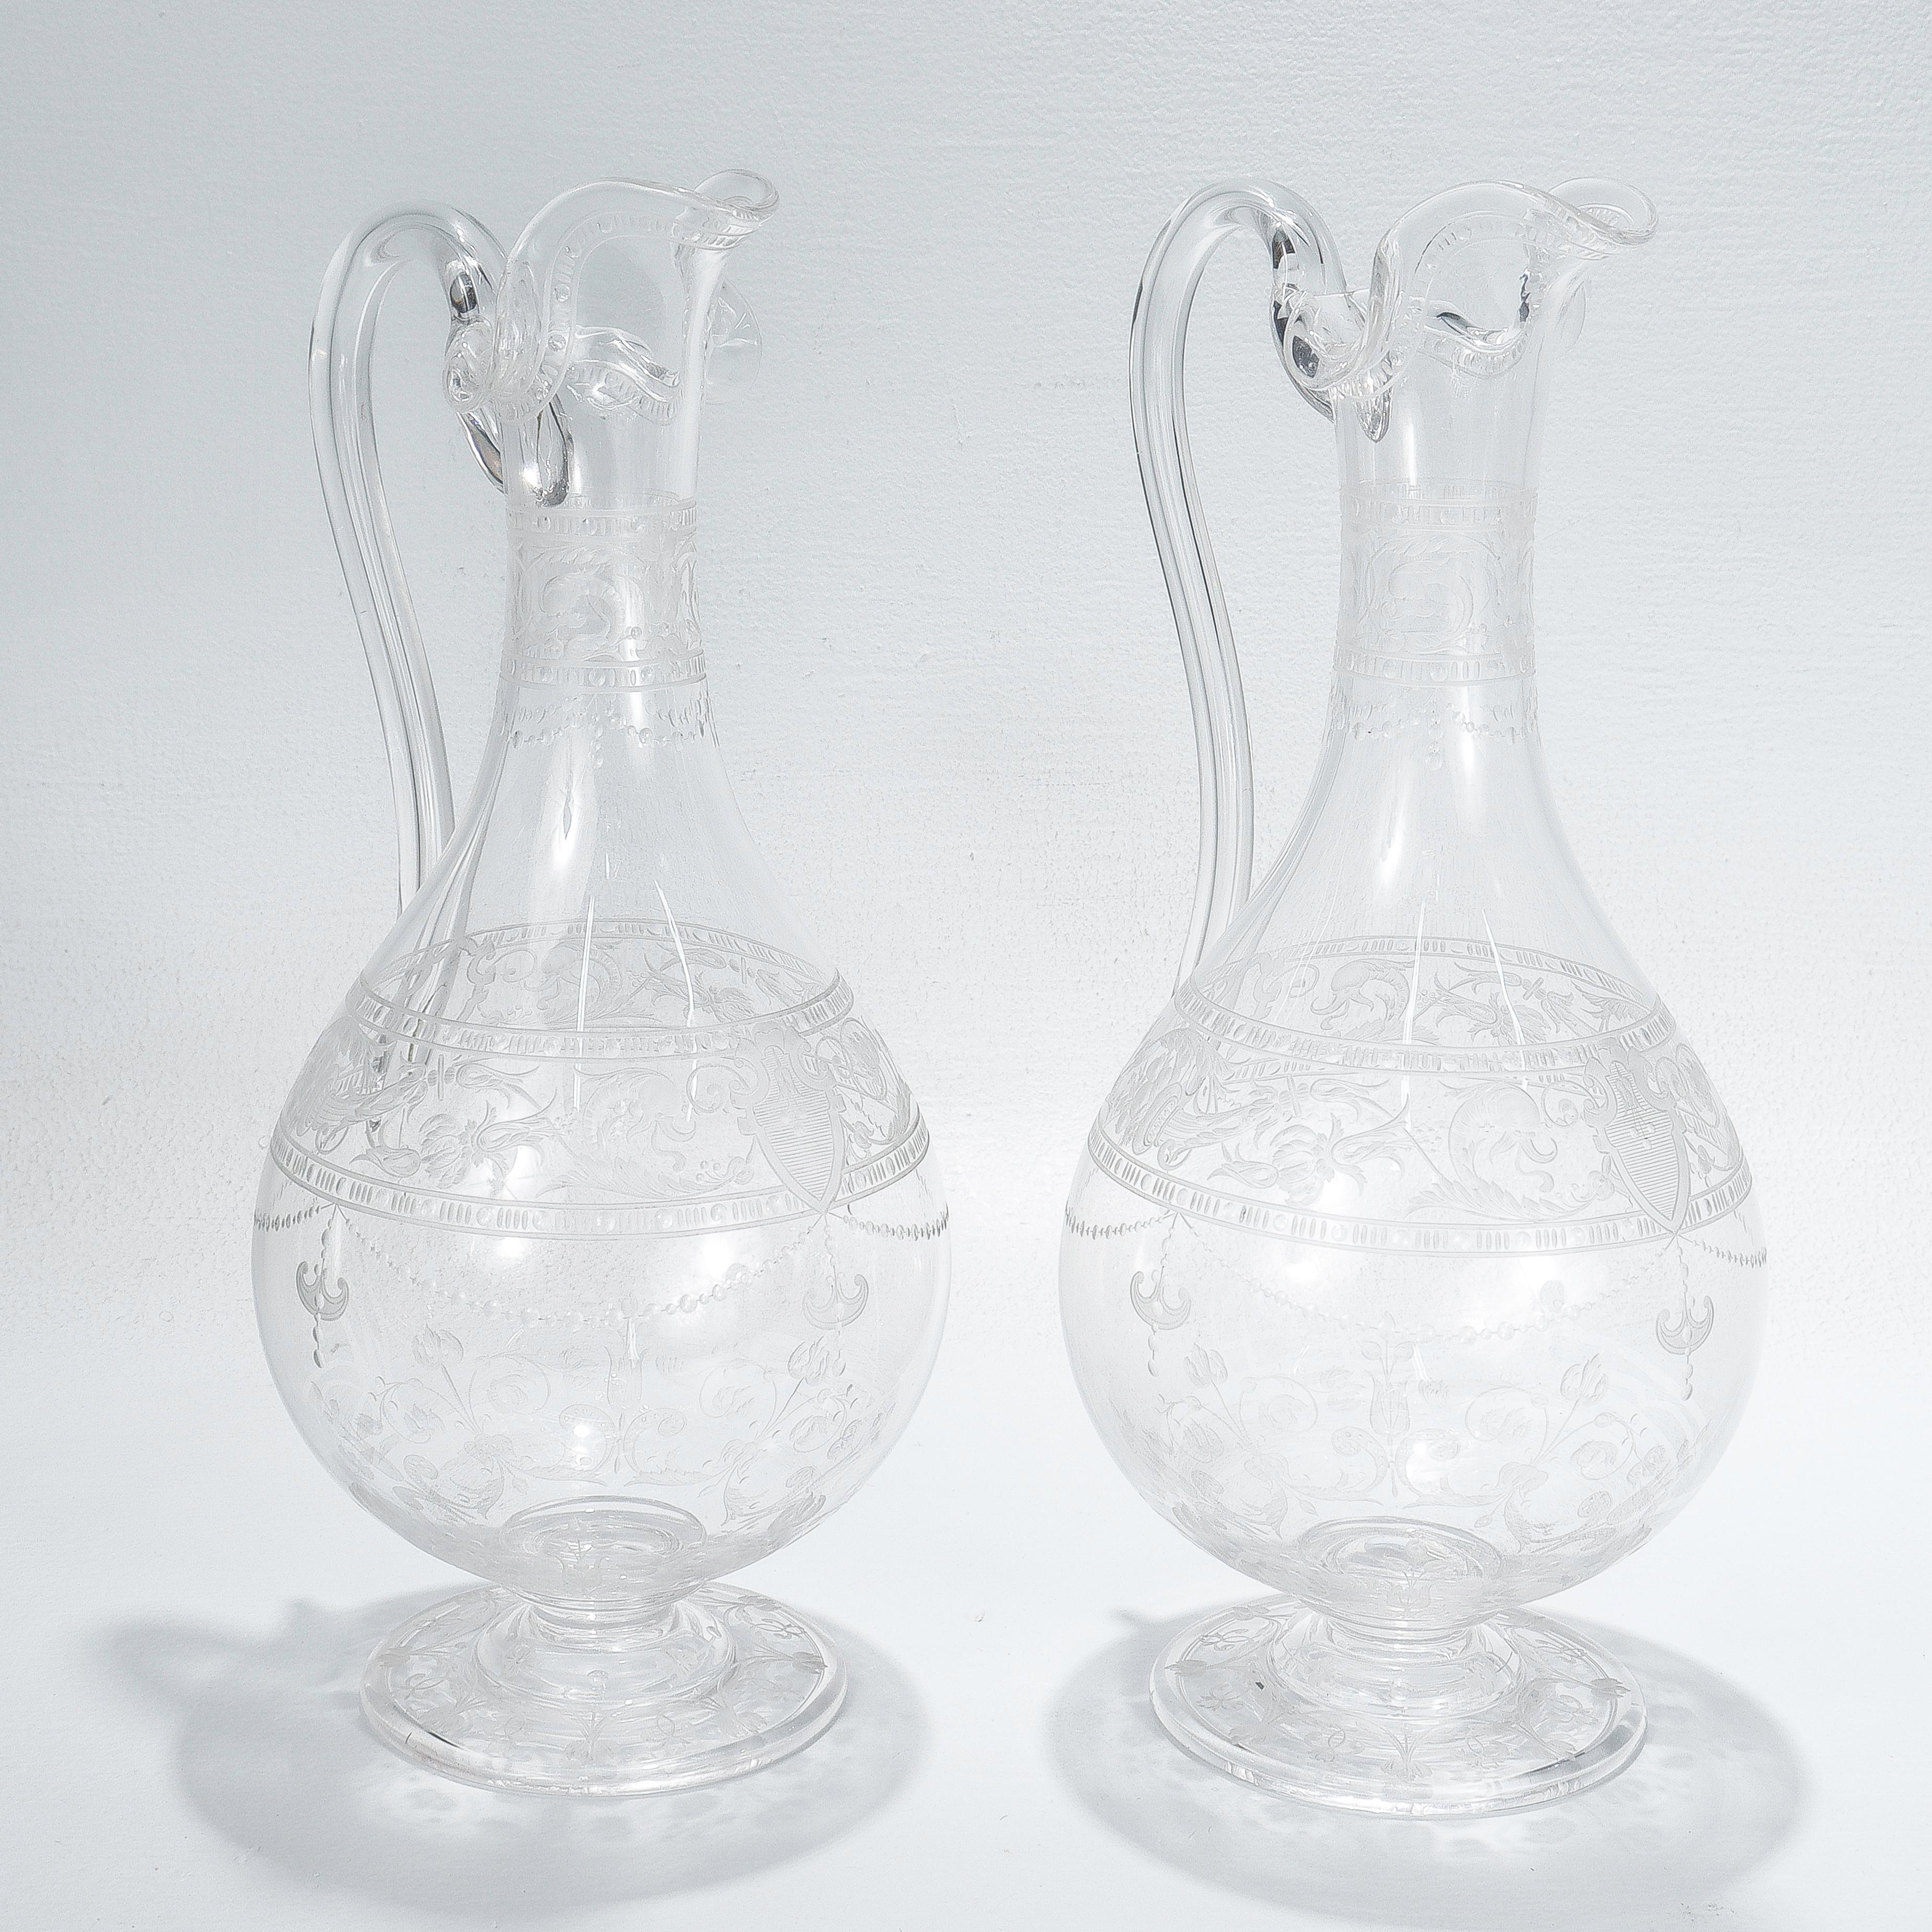 Pair of Antique Stourbridge Etched & Engraved Glass Water Pitchers or Decanters For Sale 1